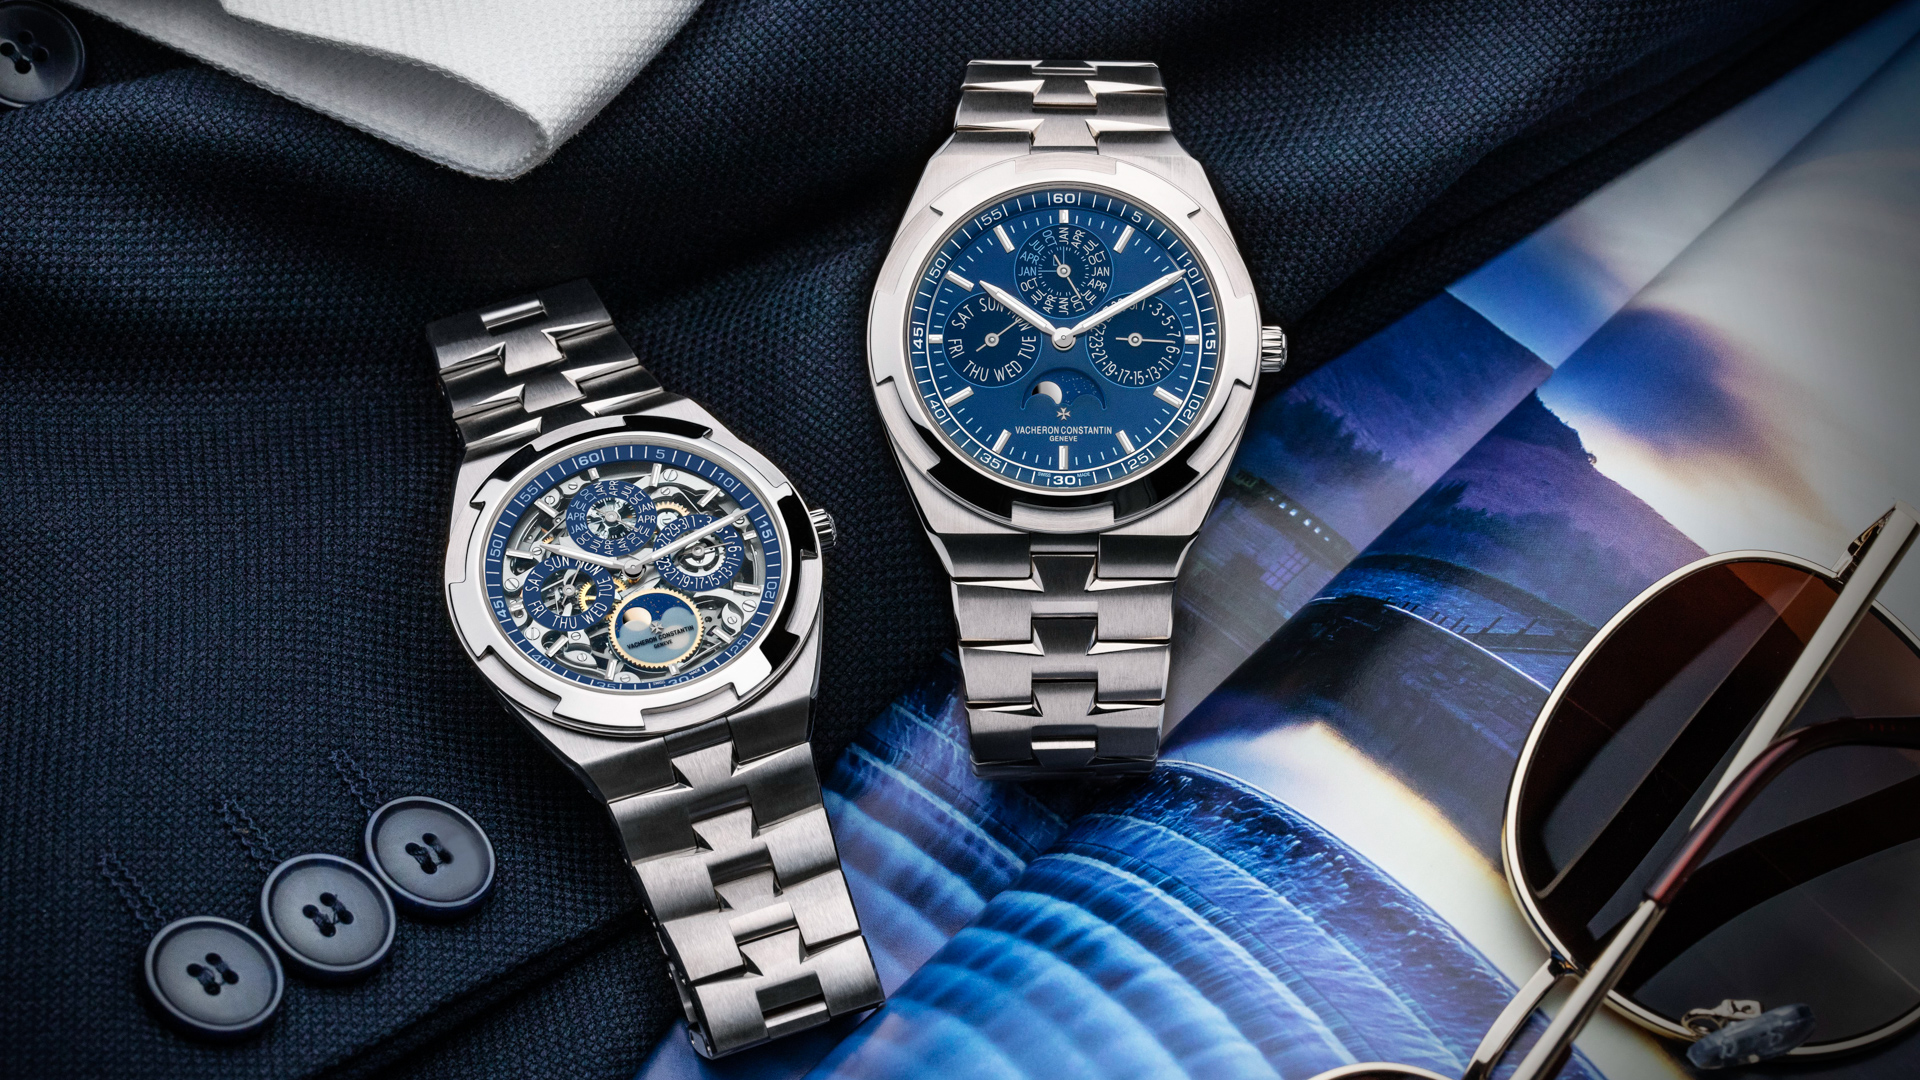 Vacheron Constantin Now Offering The Overseas Perpetual Calendar Ultra-Thin In Two New White-Gold Styles